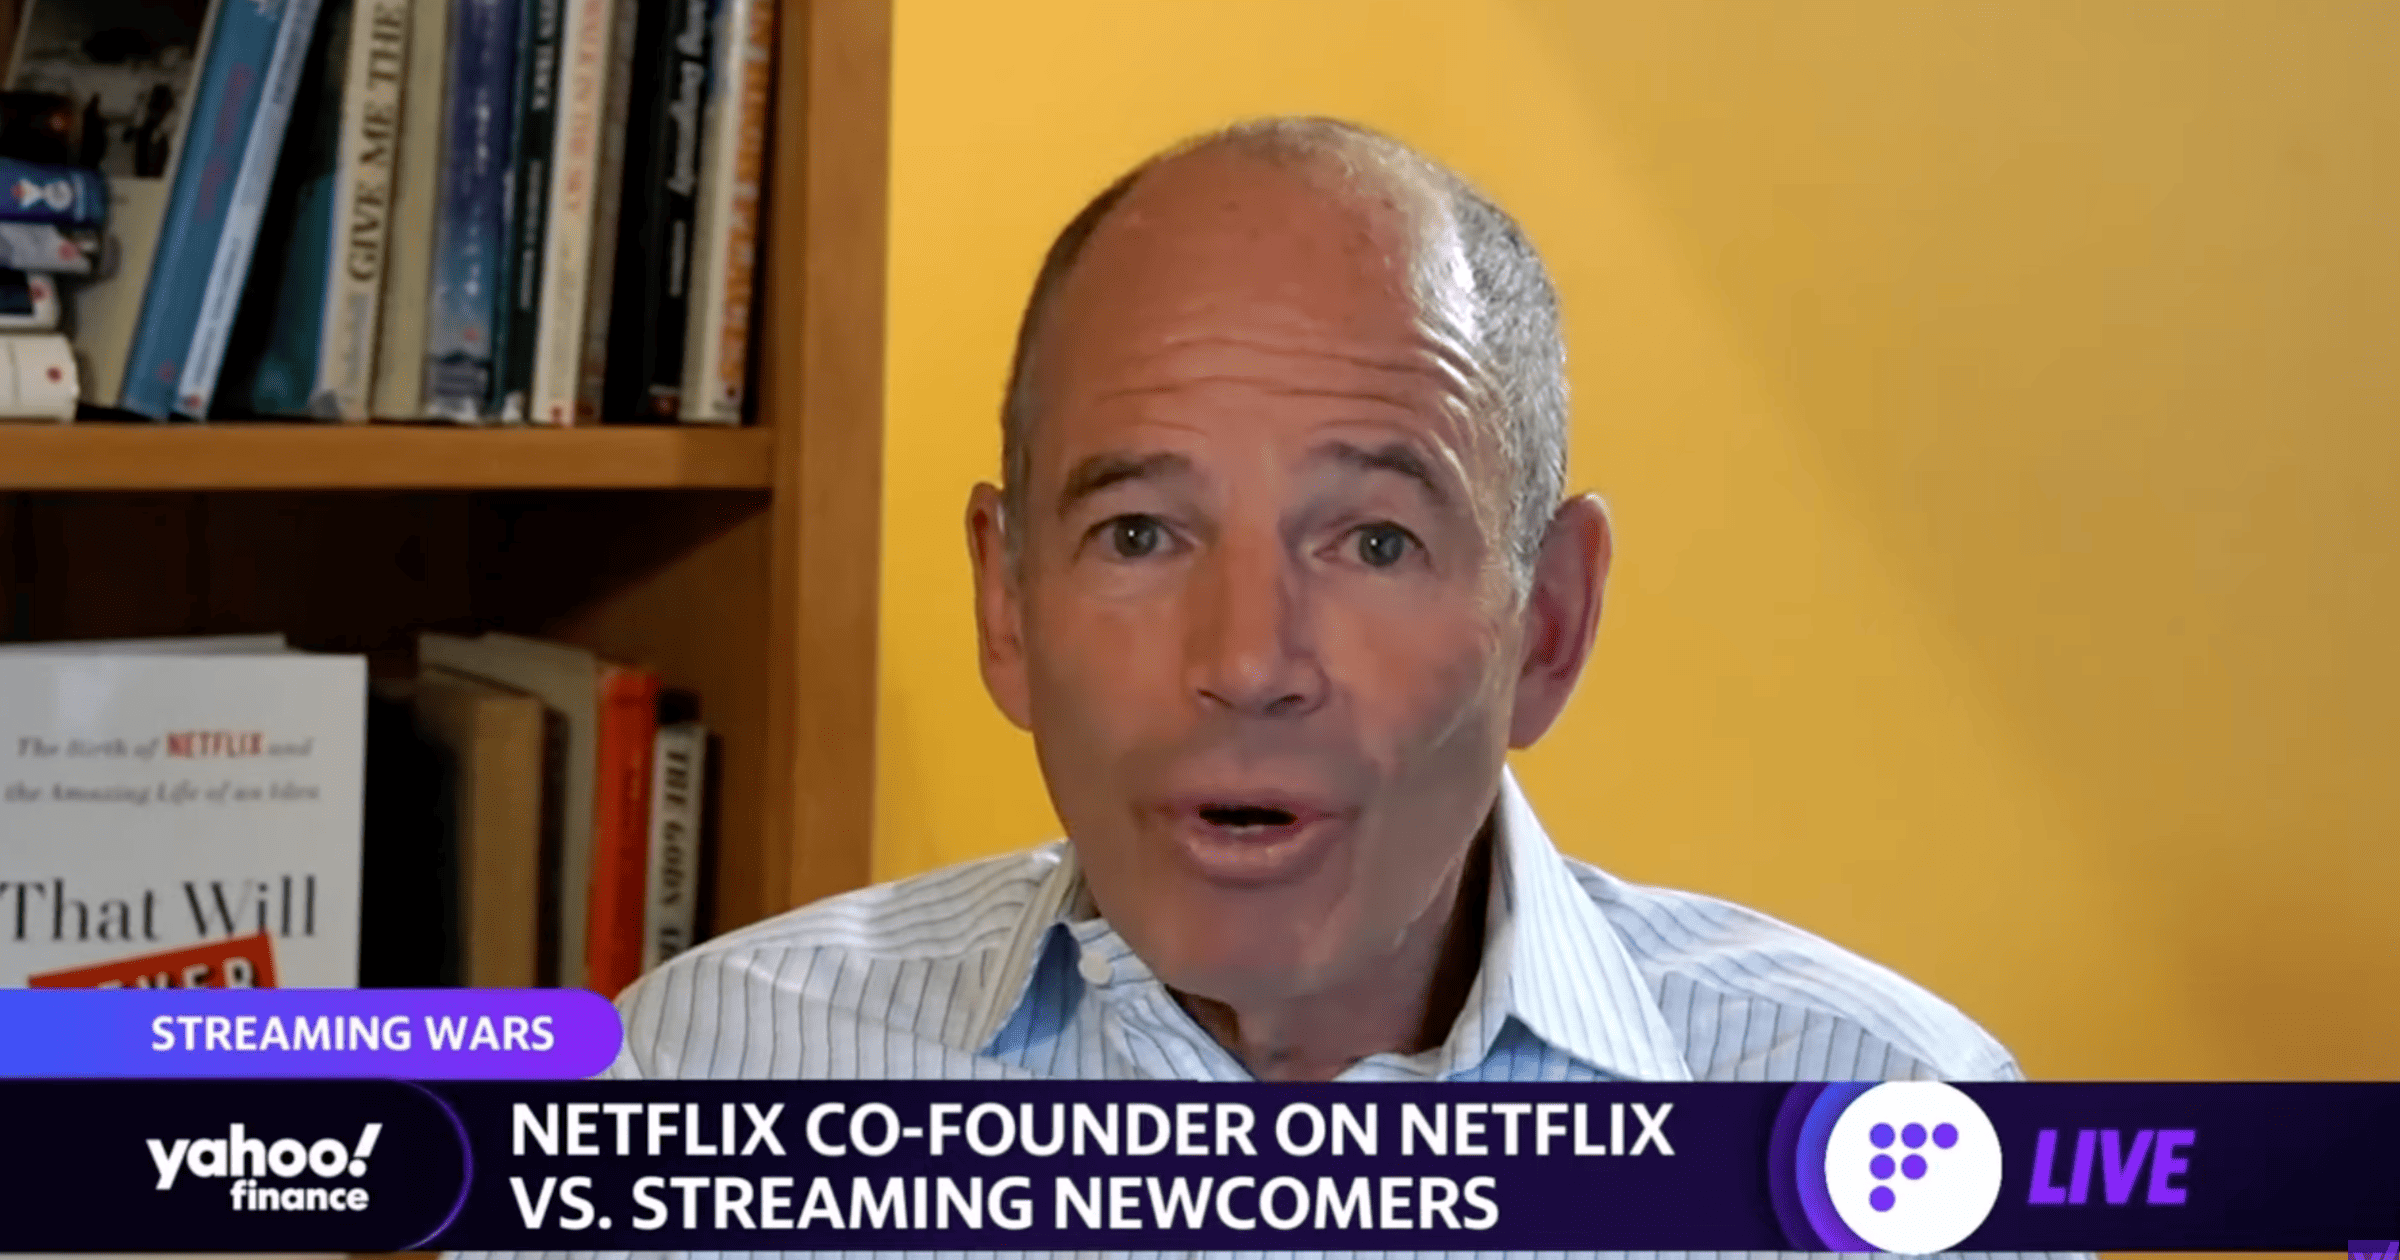 Netflix Co-Founder Takes Swipe at Apple TV+, but Has ‘Deepest Respect’ For Disney